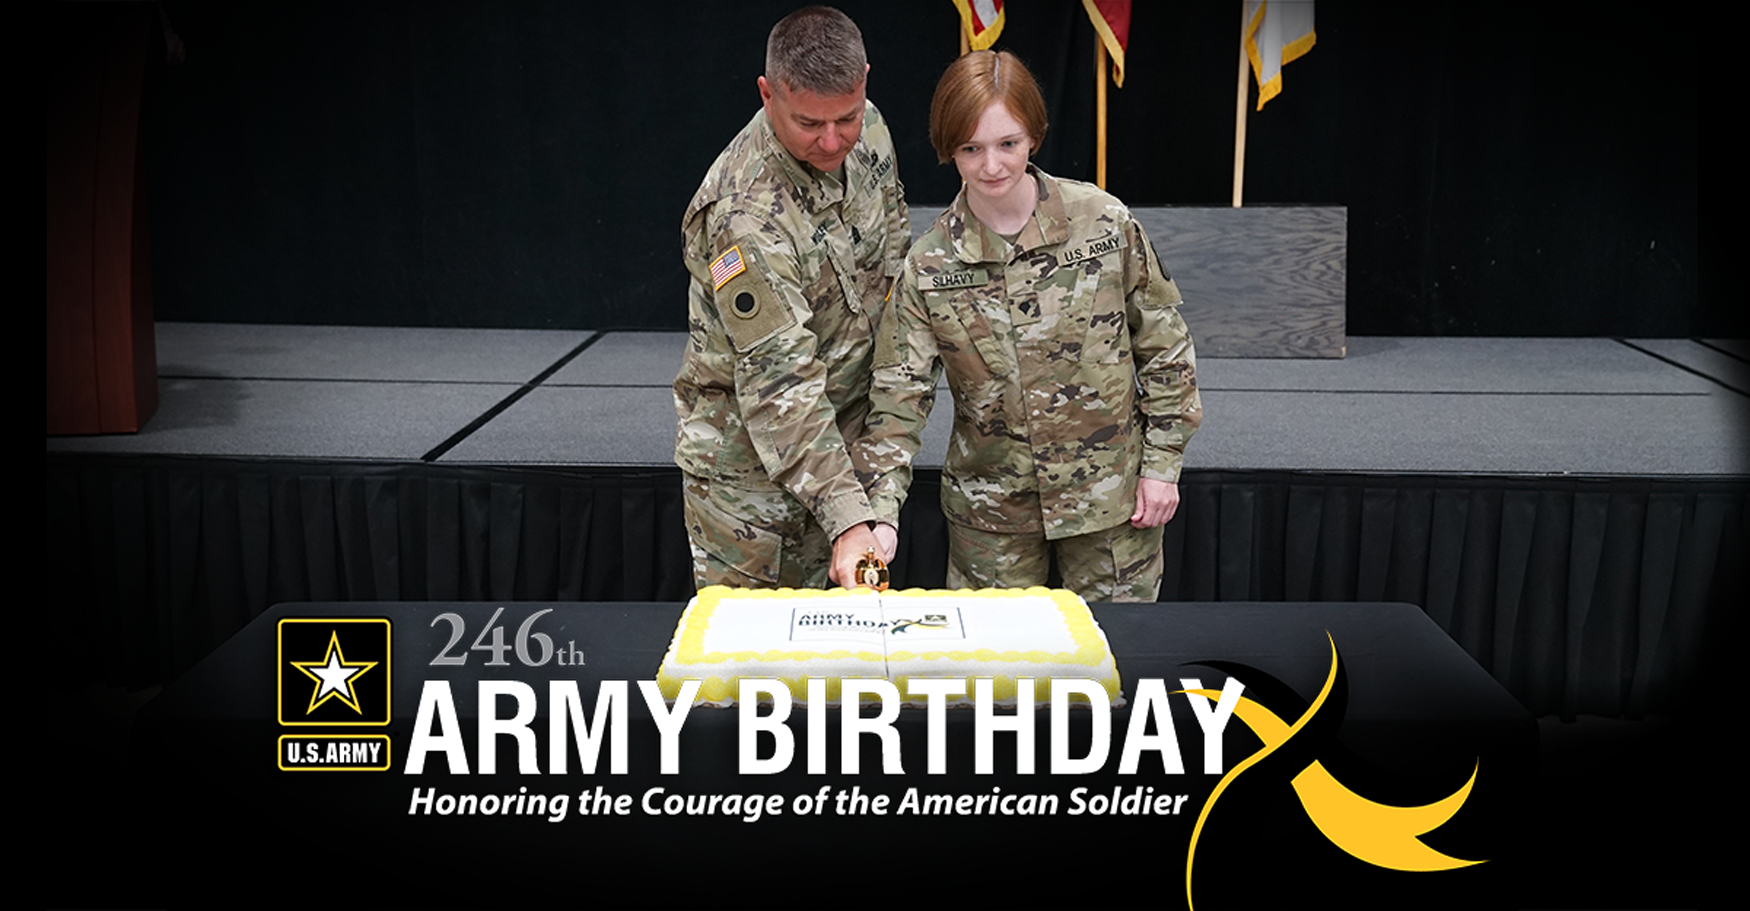 Male and female Soldiers cut cake with sword.